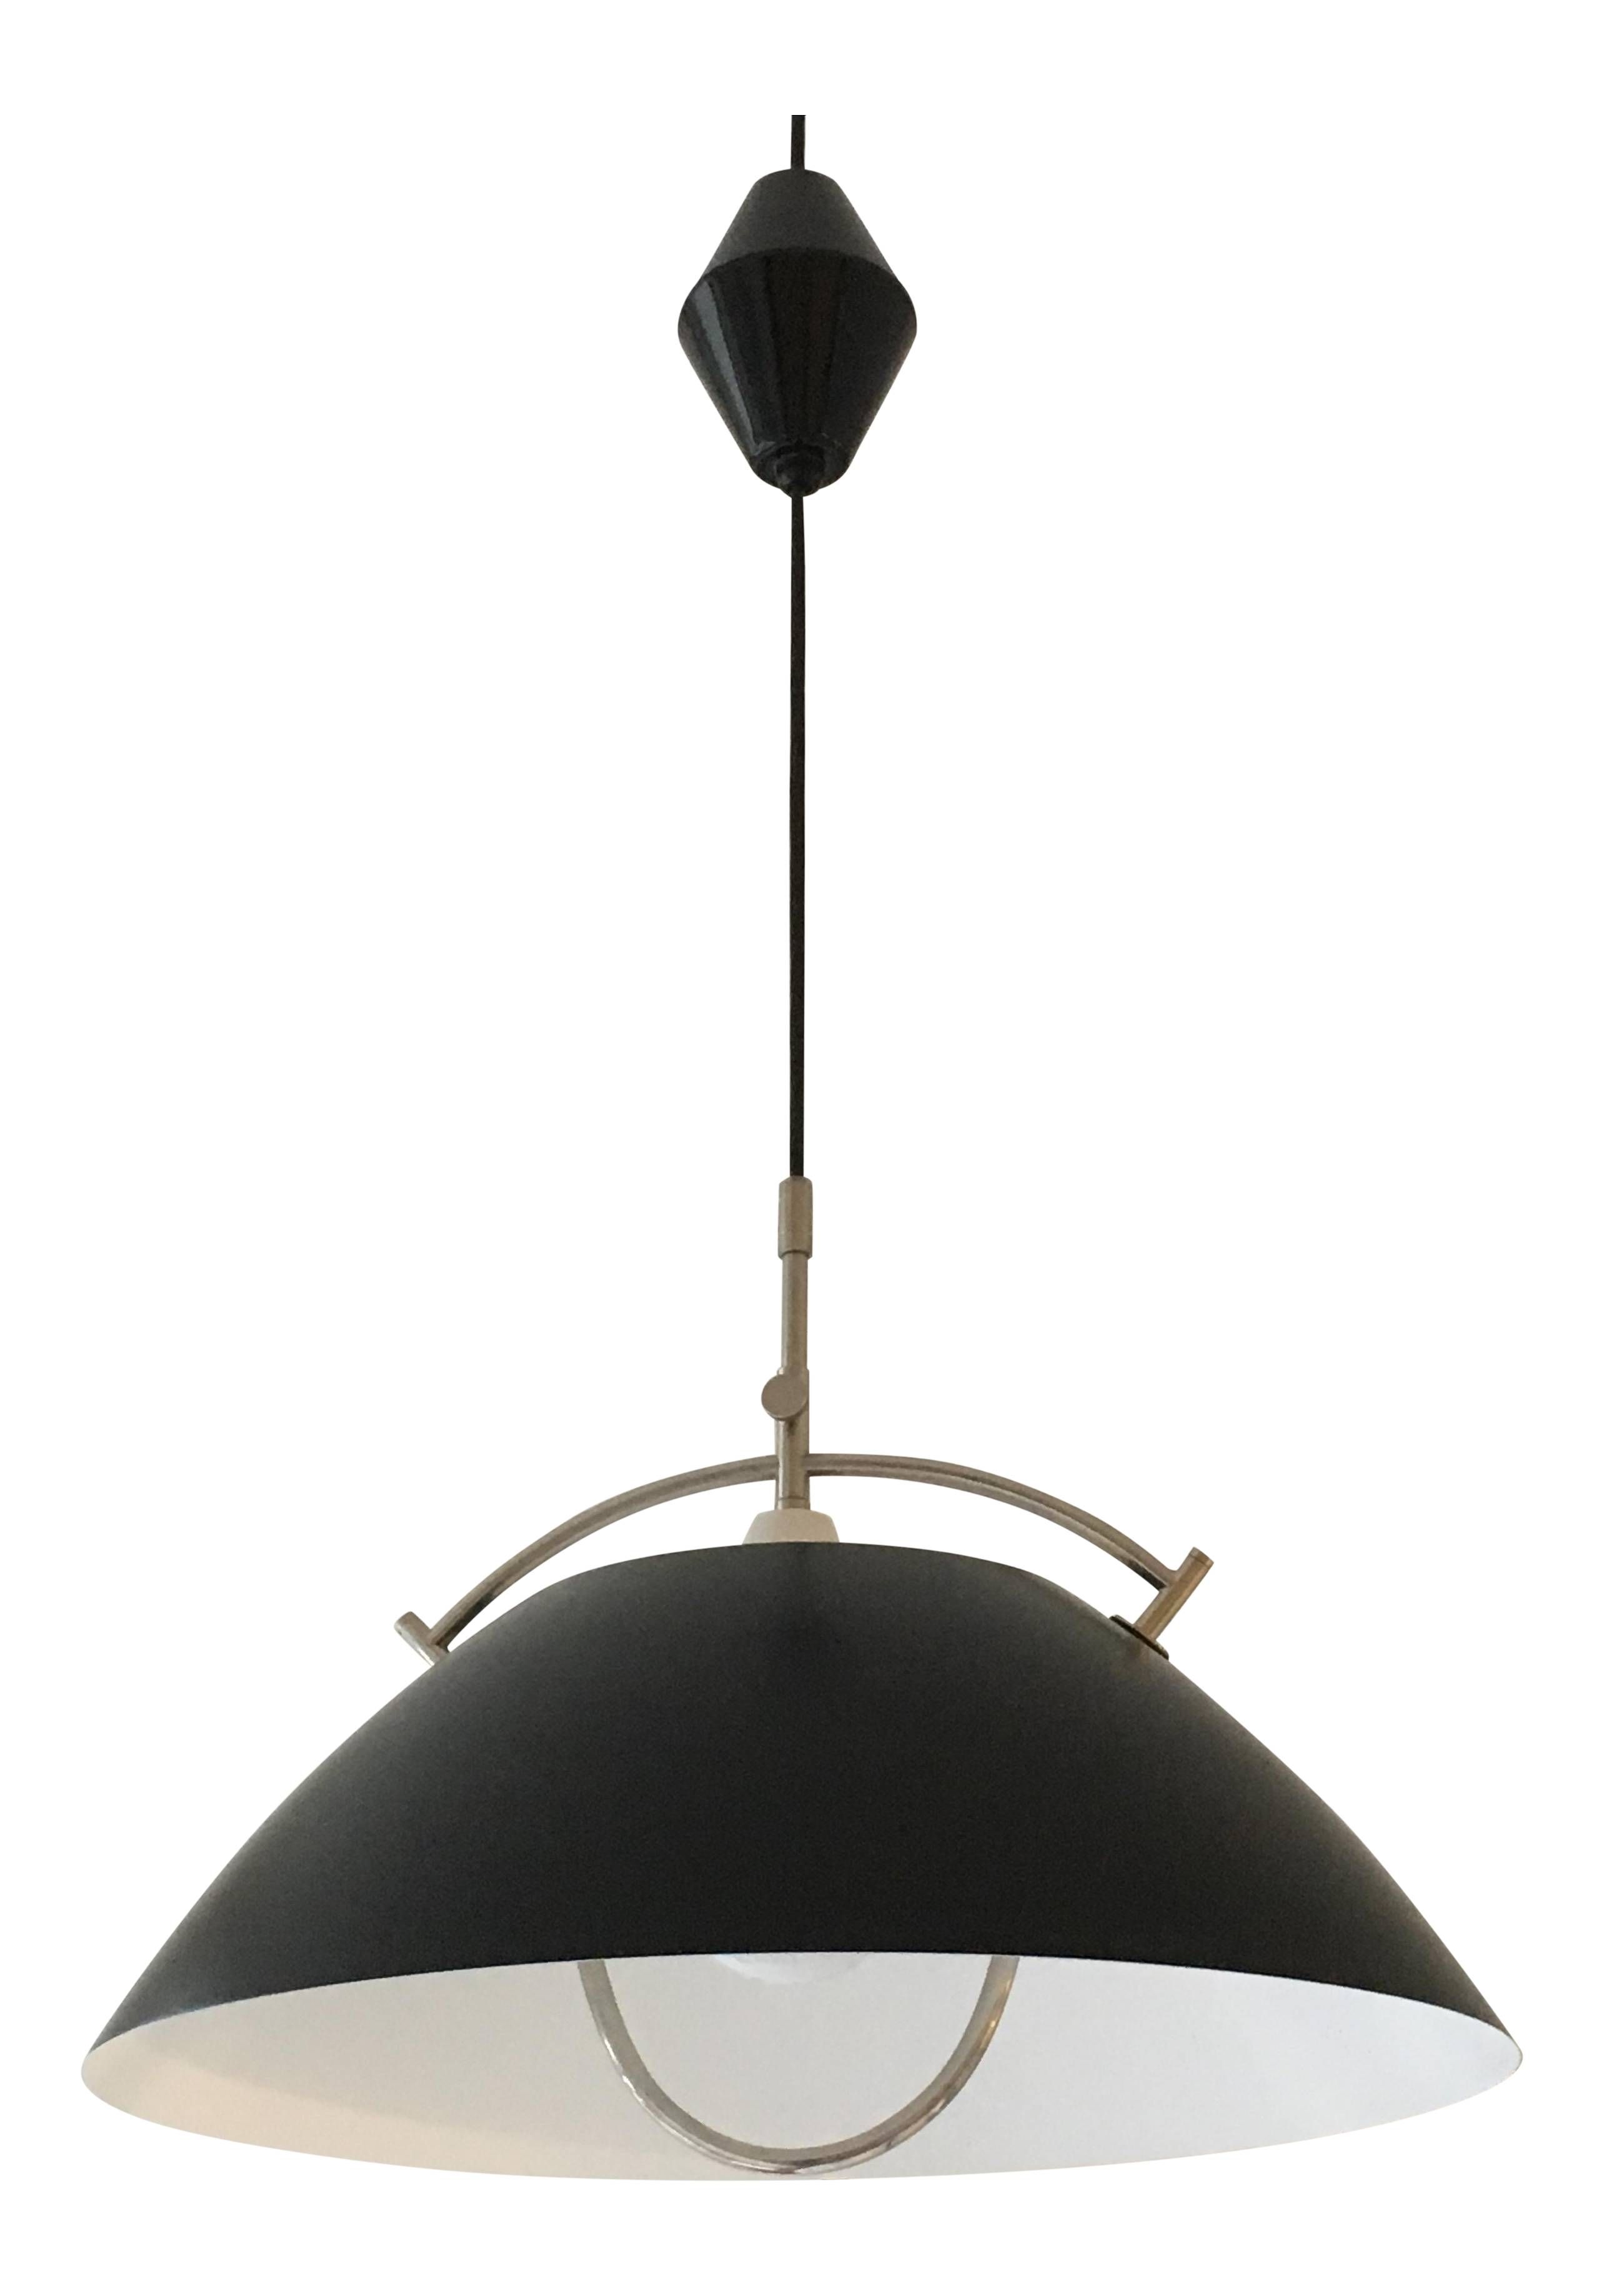 Fresh Retractable Ceiling Light 97 For Your Edison Pendant Light Intended For Retractable Pendant Lights (View 2 of 15)